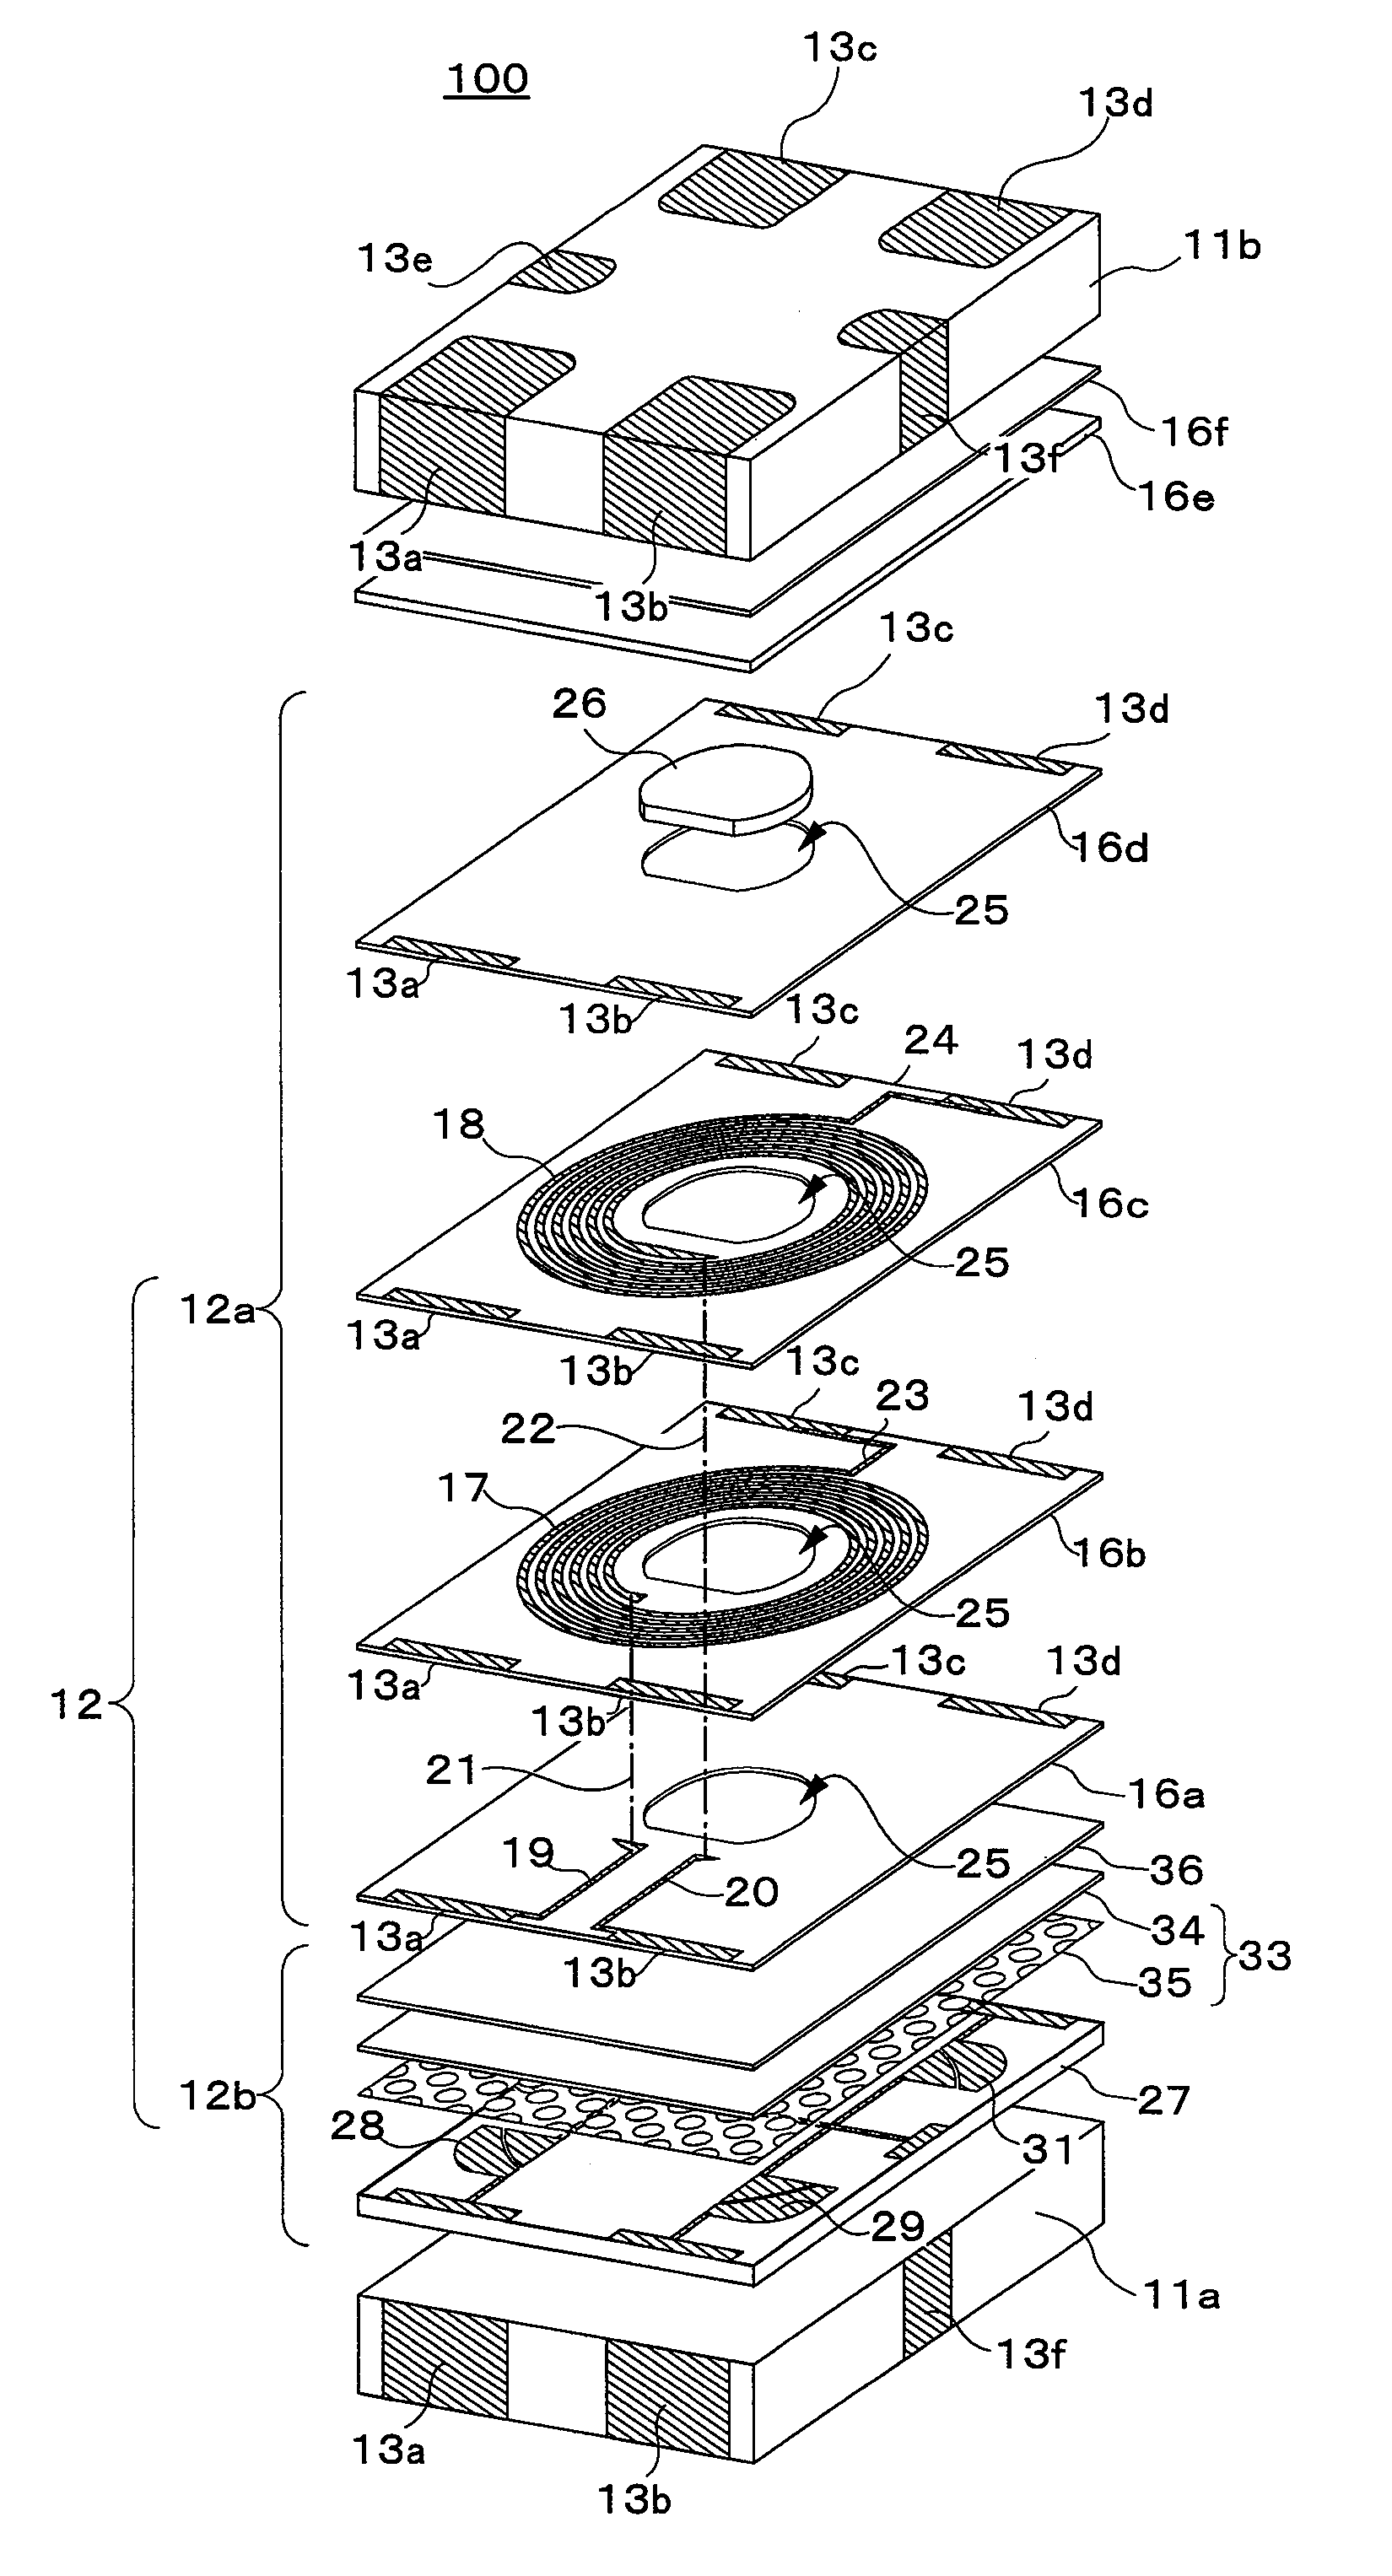 Composite electronic device